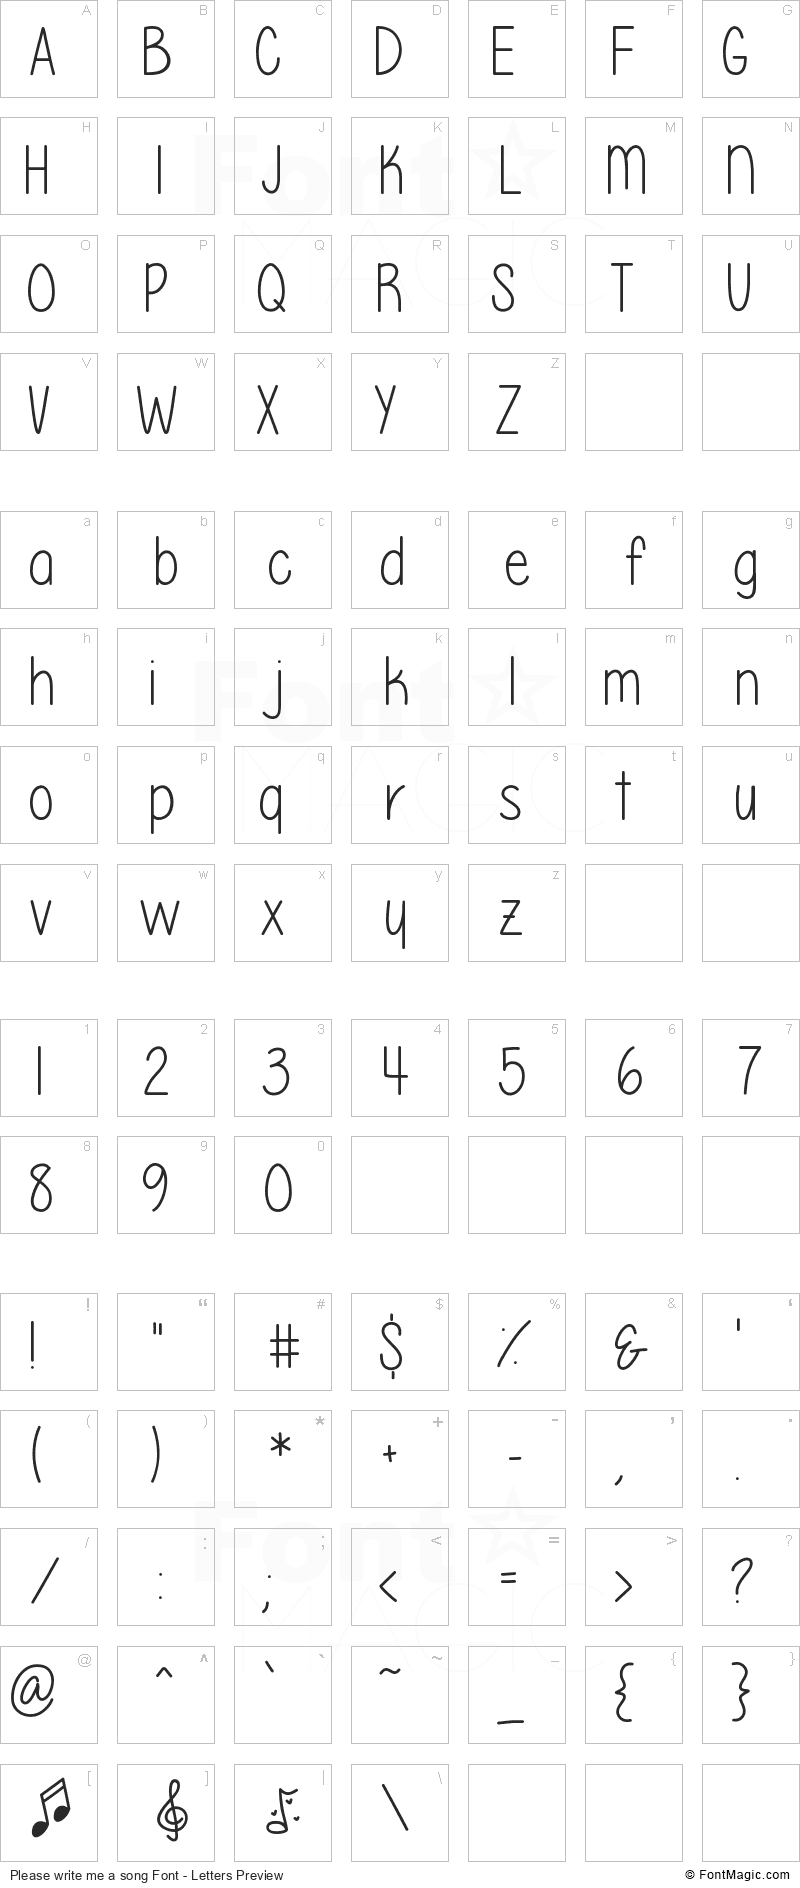 Please write me a song Font - All Latters Preview Chart